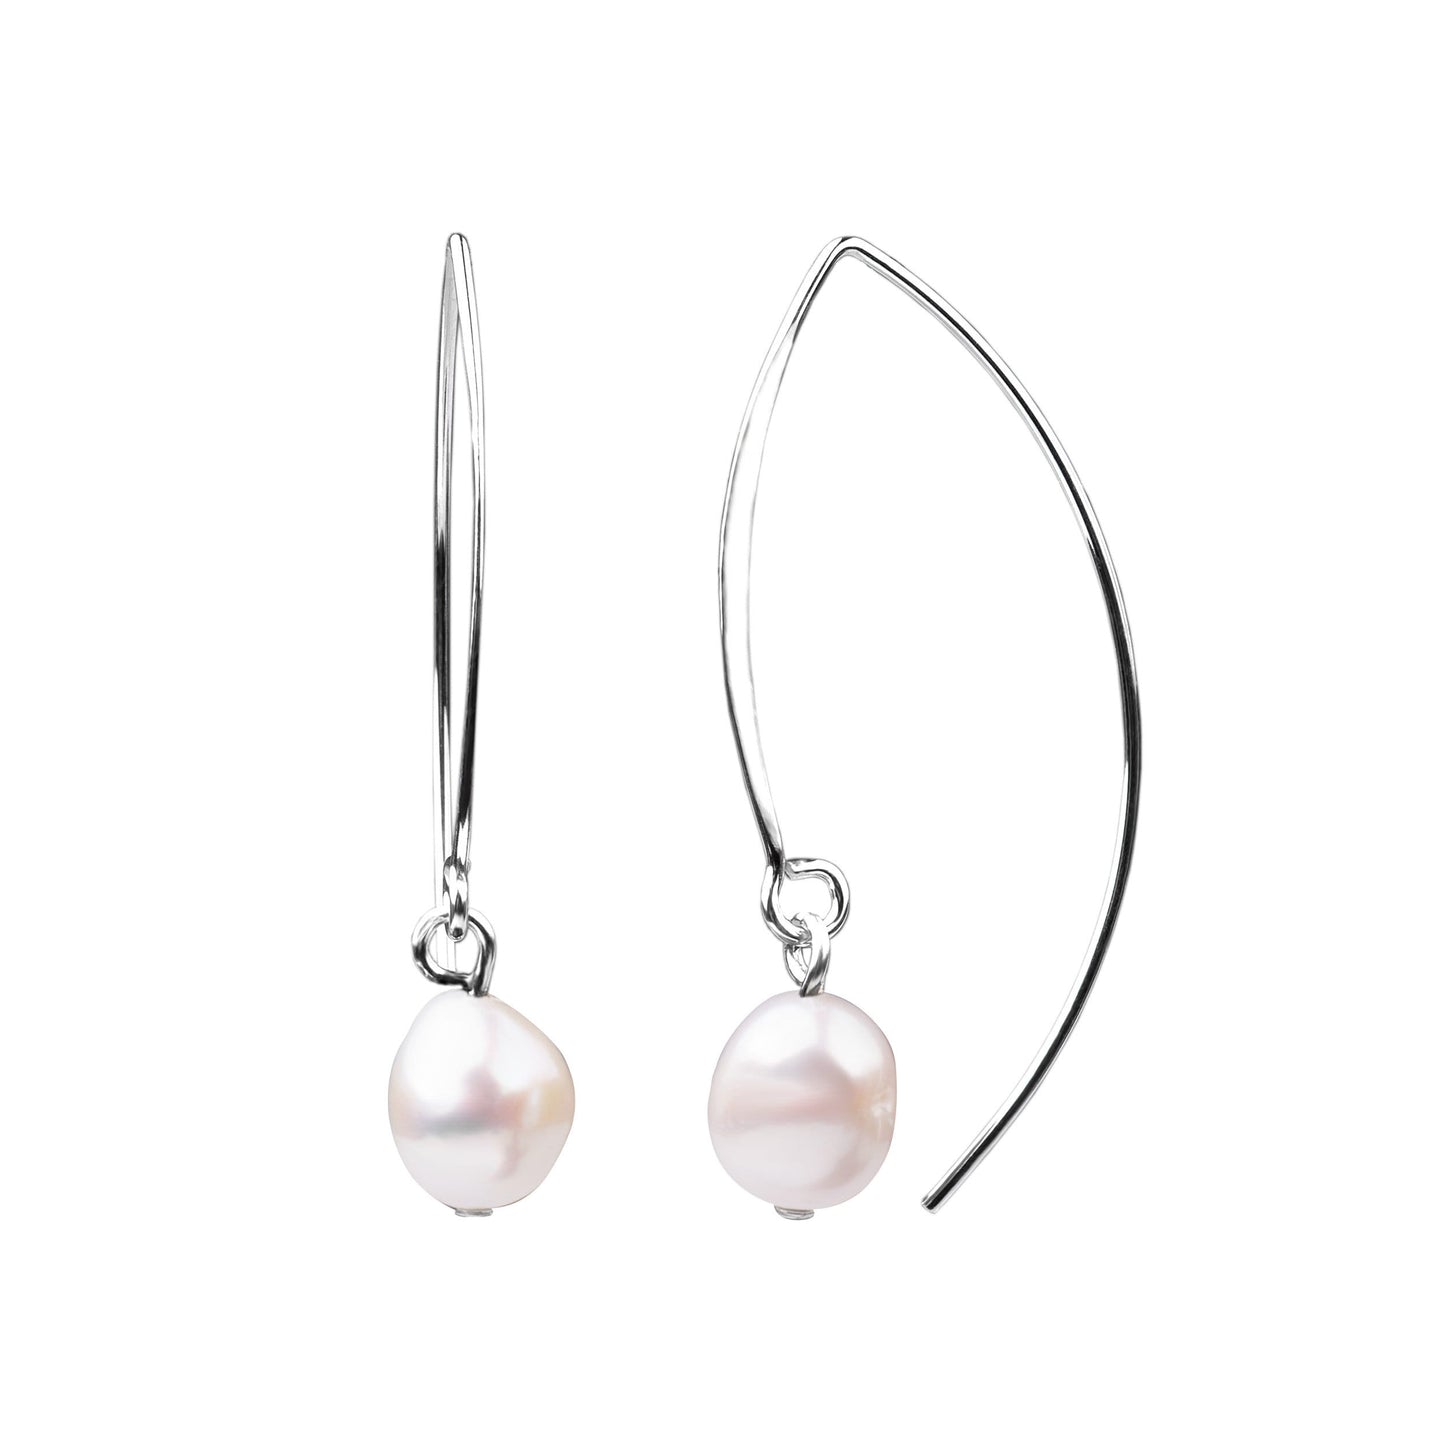 Faux Pearl White Earring Hand Crafted by Savvy Design